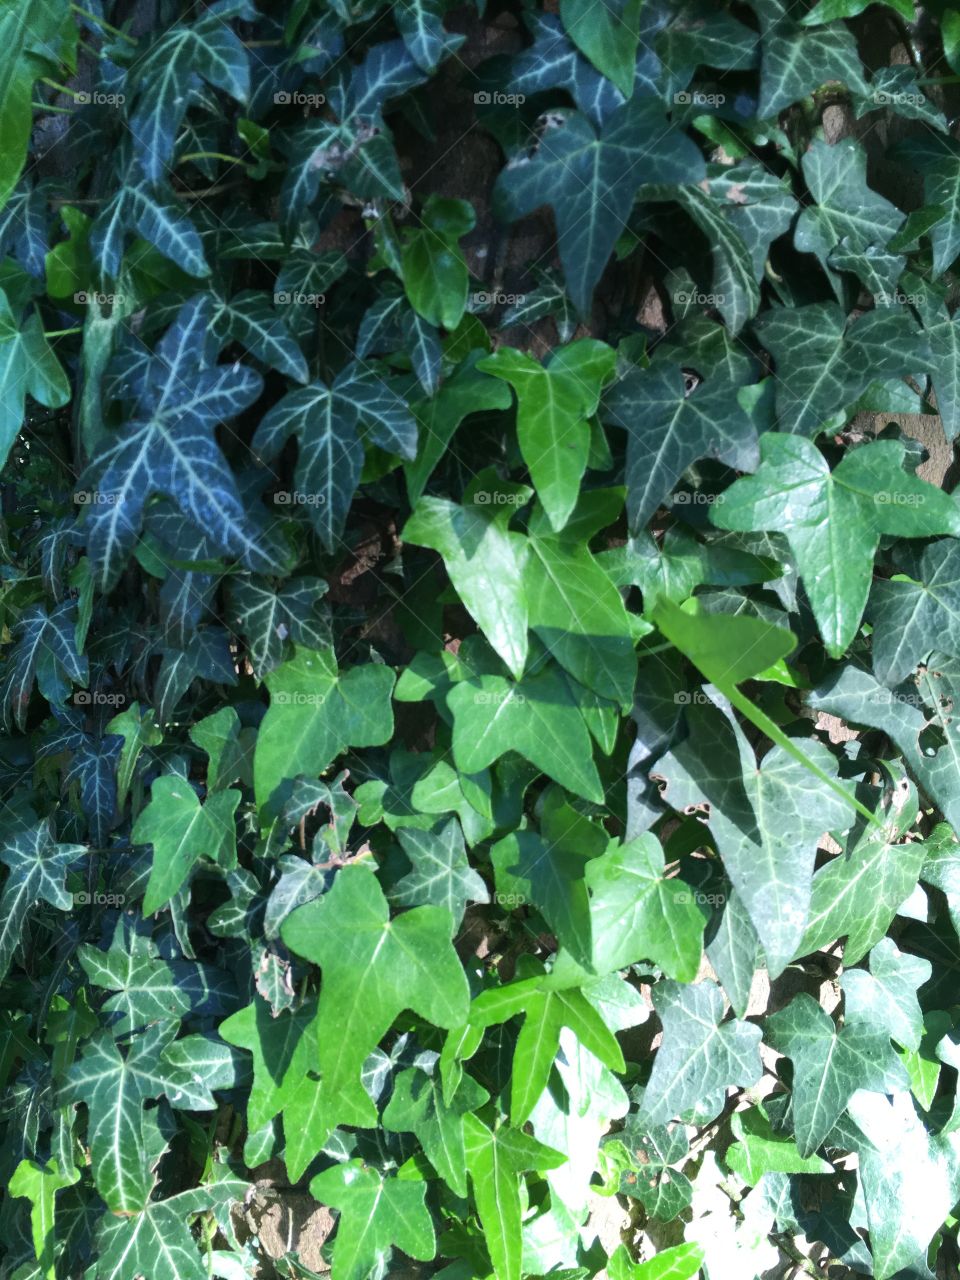 Close up view of two types of ivy - mid and dark green showing leaf veins On a tree trunk